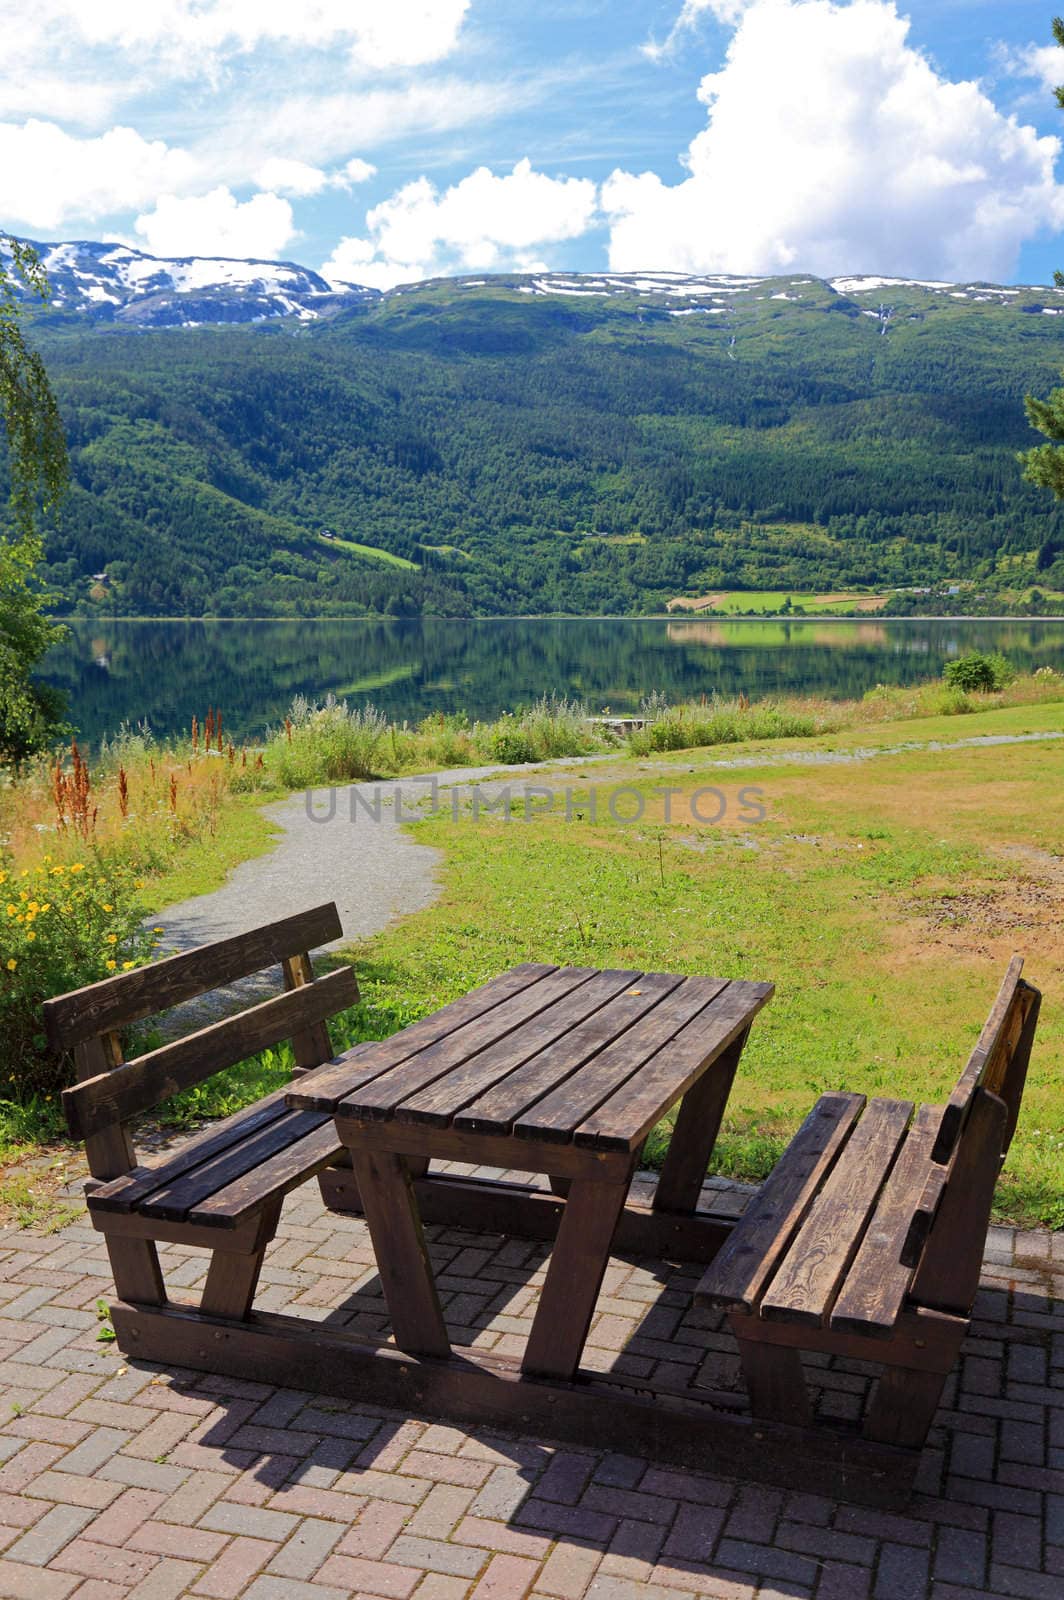 Picnic table and benches near lake in Norway, Europe.